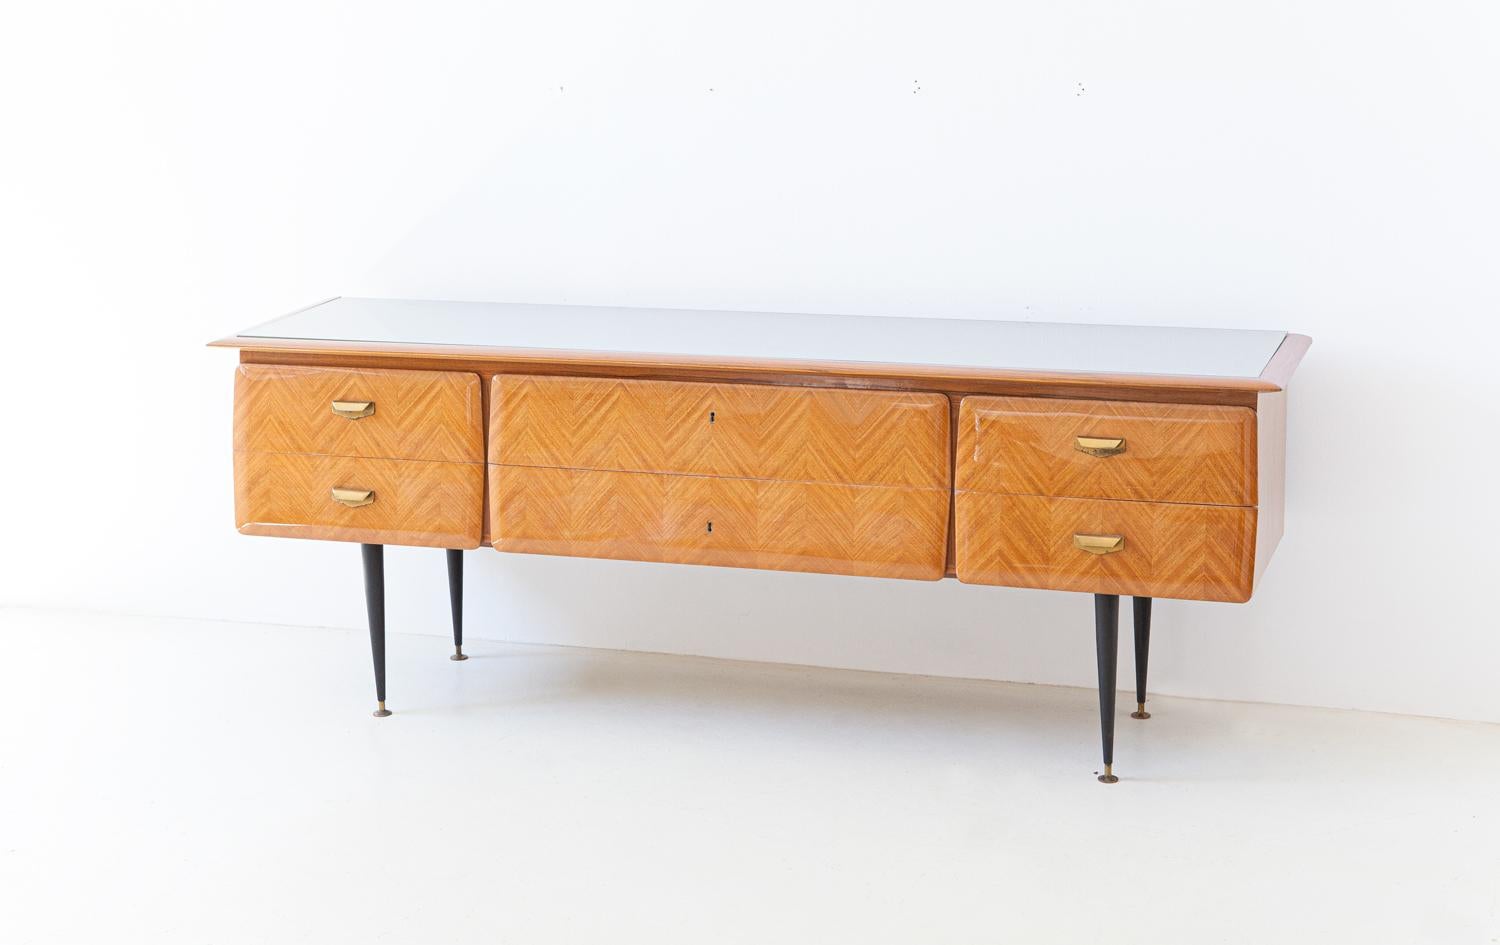 Elegant and modern sideboard from the 1950s
High quality Italian manufacture made by ‘furniture manufacturer in Cantu’
Blonde mahogany veneer, laid with dovetail work on the front.
Upper top in gray / silver back-lacquered glass
Brass handles and